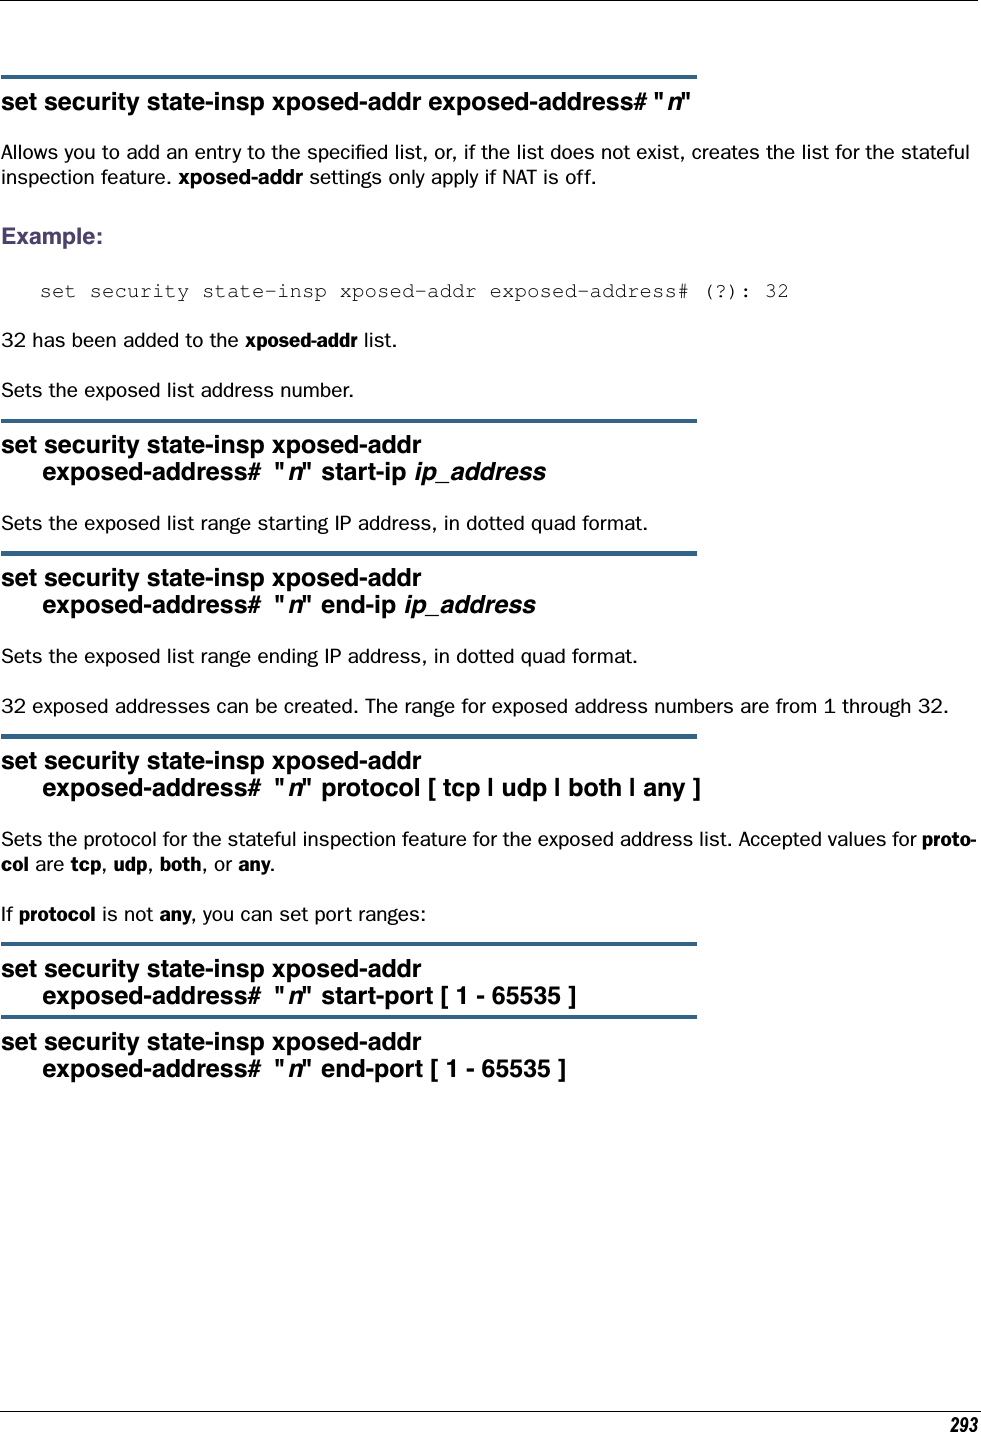 293set security state-insp xposed-addr exposed-address# &quot;n&quot; Allows you to add an entry to the speciﬁed list, or, if the list does not exist, creates the list for the stateful inspection feature. xposed-addr settings only apply if NAT is off.Example:set security state-insp xposed-addr exposed-address# (?): 3232 has been added to the xposed-addr list.Sets the exposed list address number.set security state-insp xposed-addr      exposed-address#  &quot;n&quot; start-ip ip_addressSets the exposed list range starting IP address, in dotted quad format.set security state-insp xposed-addr      exposed-address#  &quot;n&quot; end-ip ip_addressSets the exposed list range ending IP address, in dotted quad format.32 exposed addresses can be created. The range for exposed address numbers are from 1 through 32.set security state-insp xposed-addr       exposed-address#  &quot;n&quot; protocol [ tcp | udp | both | any ]Sets the protocol for the stateful inspection feature for the exposed address list. Accepted values for proto-col are tcp, udp, both, or any.If protocol is not any, you can set port ranges:set security state-insp xposed-addr       exposed-address#  &quot;n&quot; start-port [ 1 - 65535 ]set security state-insp xposed-addr       exposed-address#  &quot;n&quot; end-port [ 1 - 65535 ]